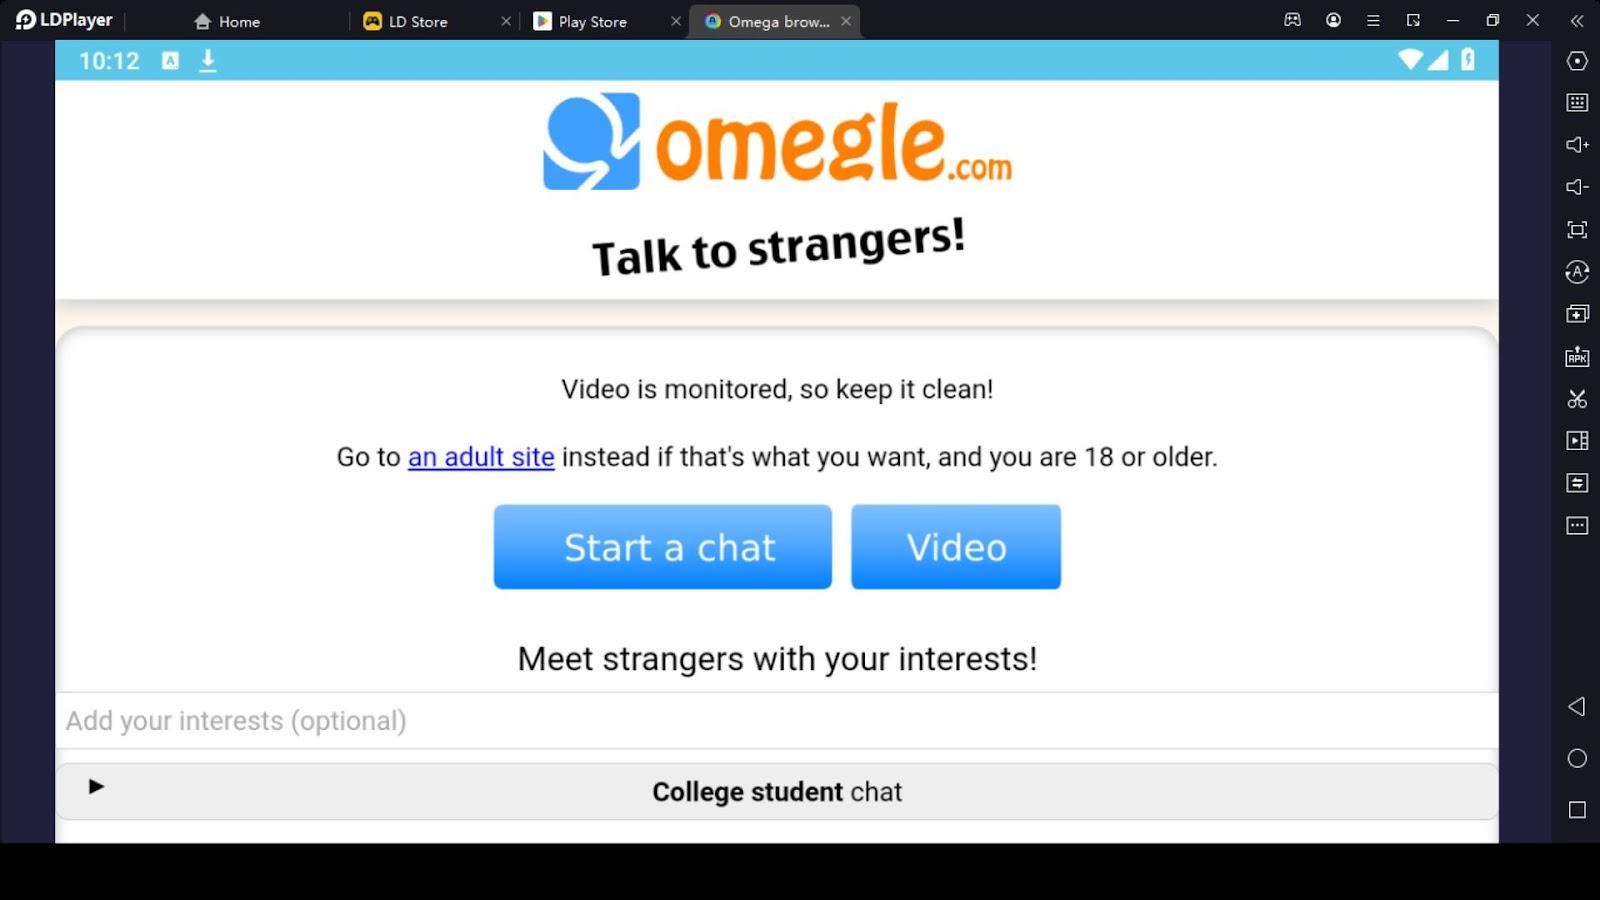 Omegle Alternatives to Connect with Strangers in the Best WayLDPlayer